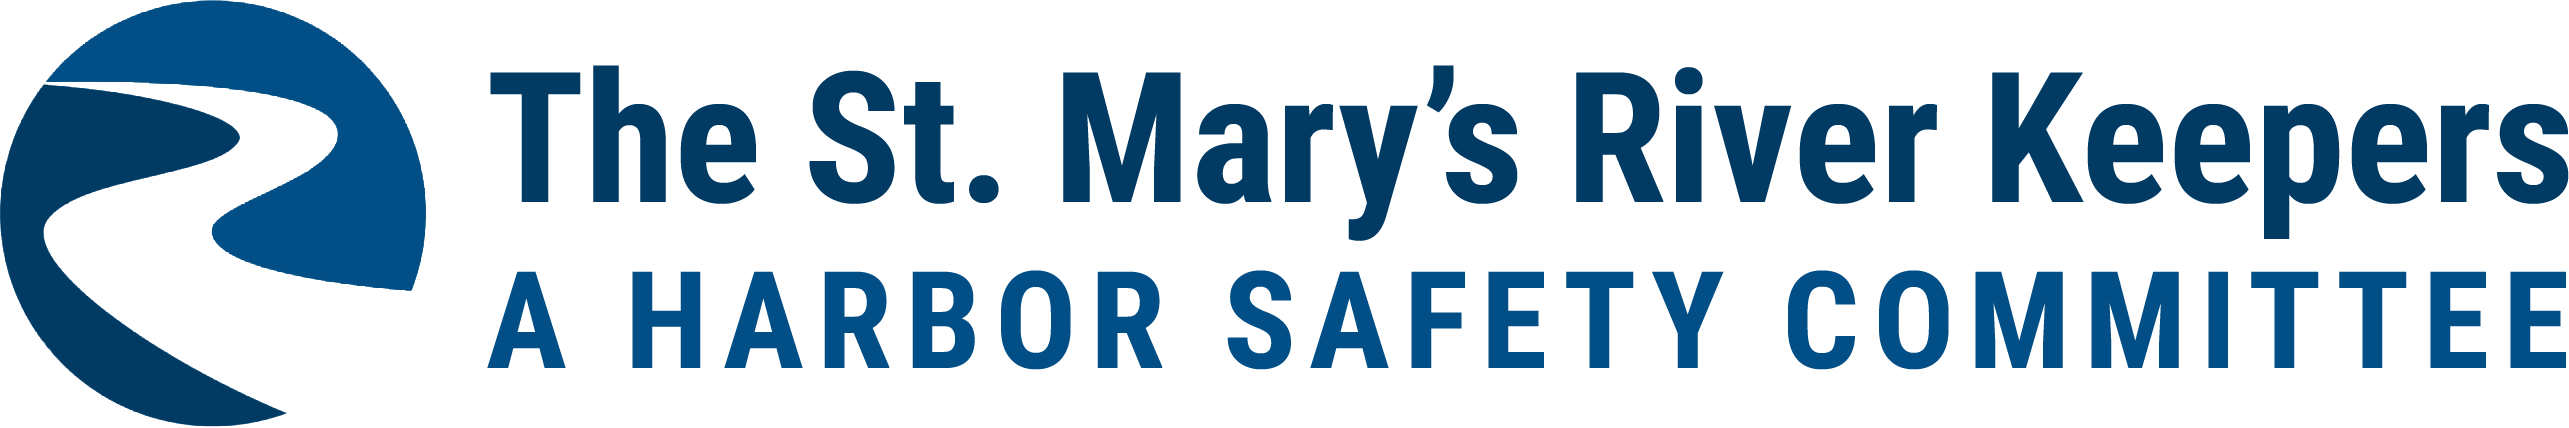 The St. Mary’s River Keepers, A Harbor Safety Committee